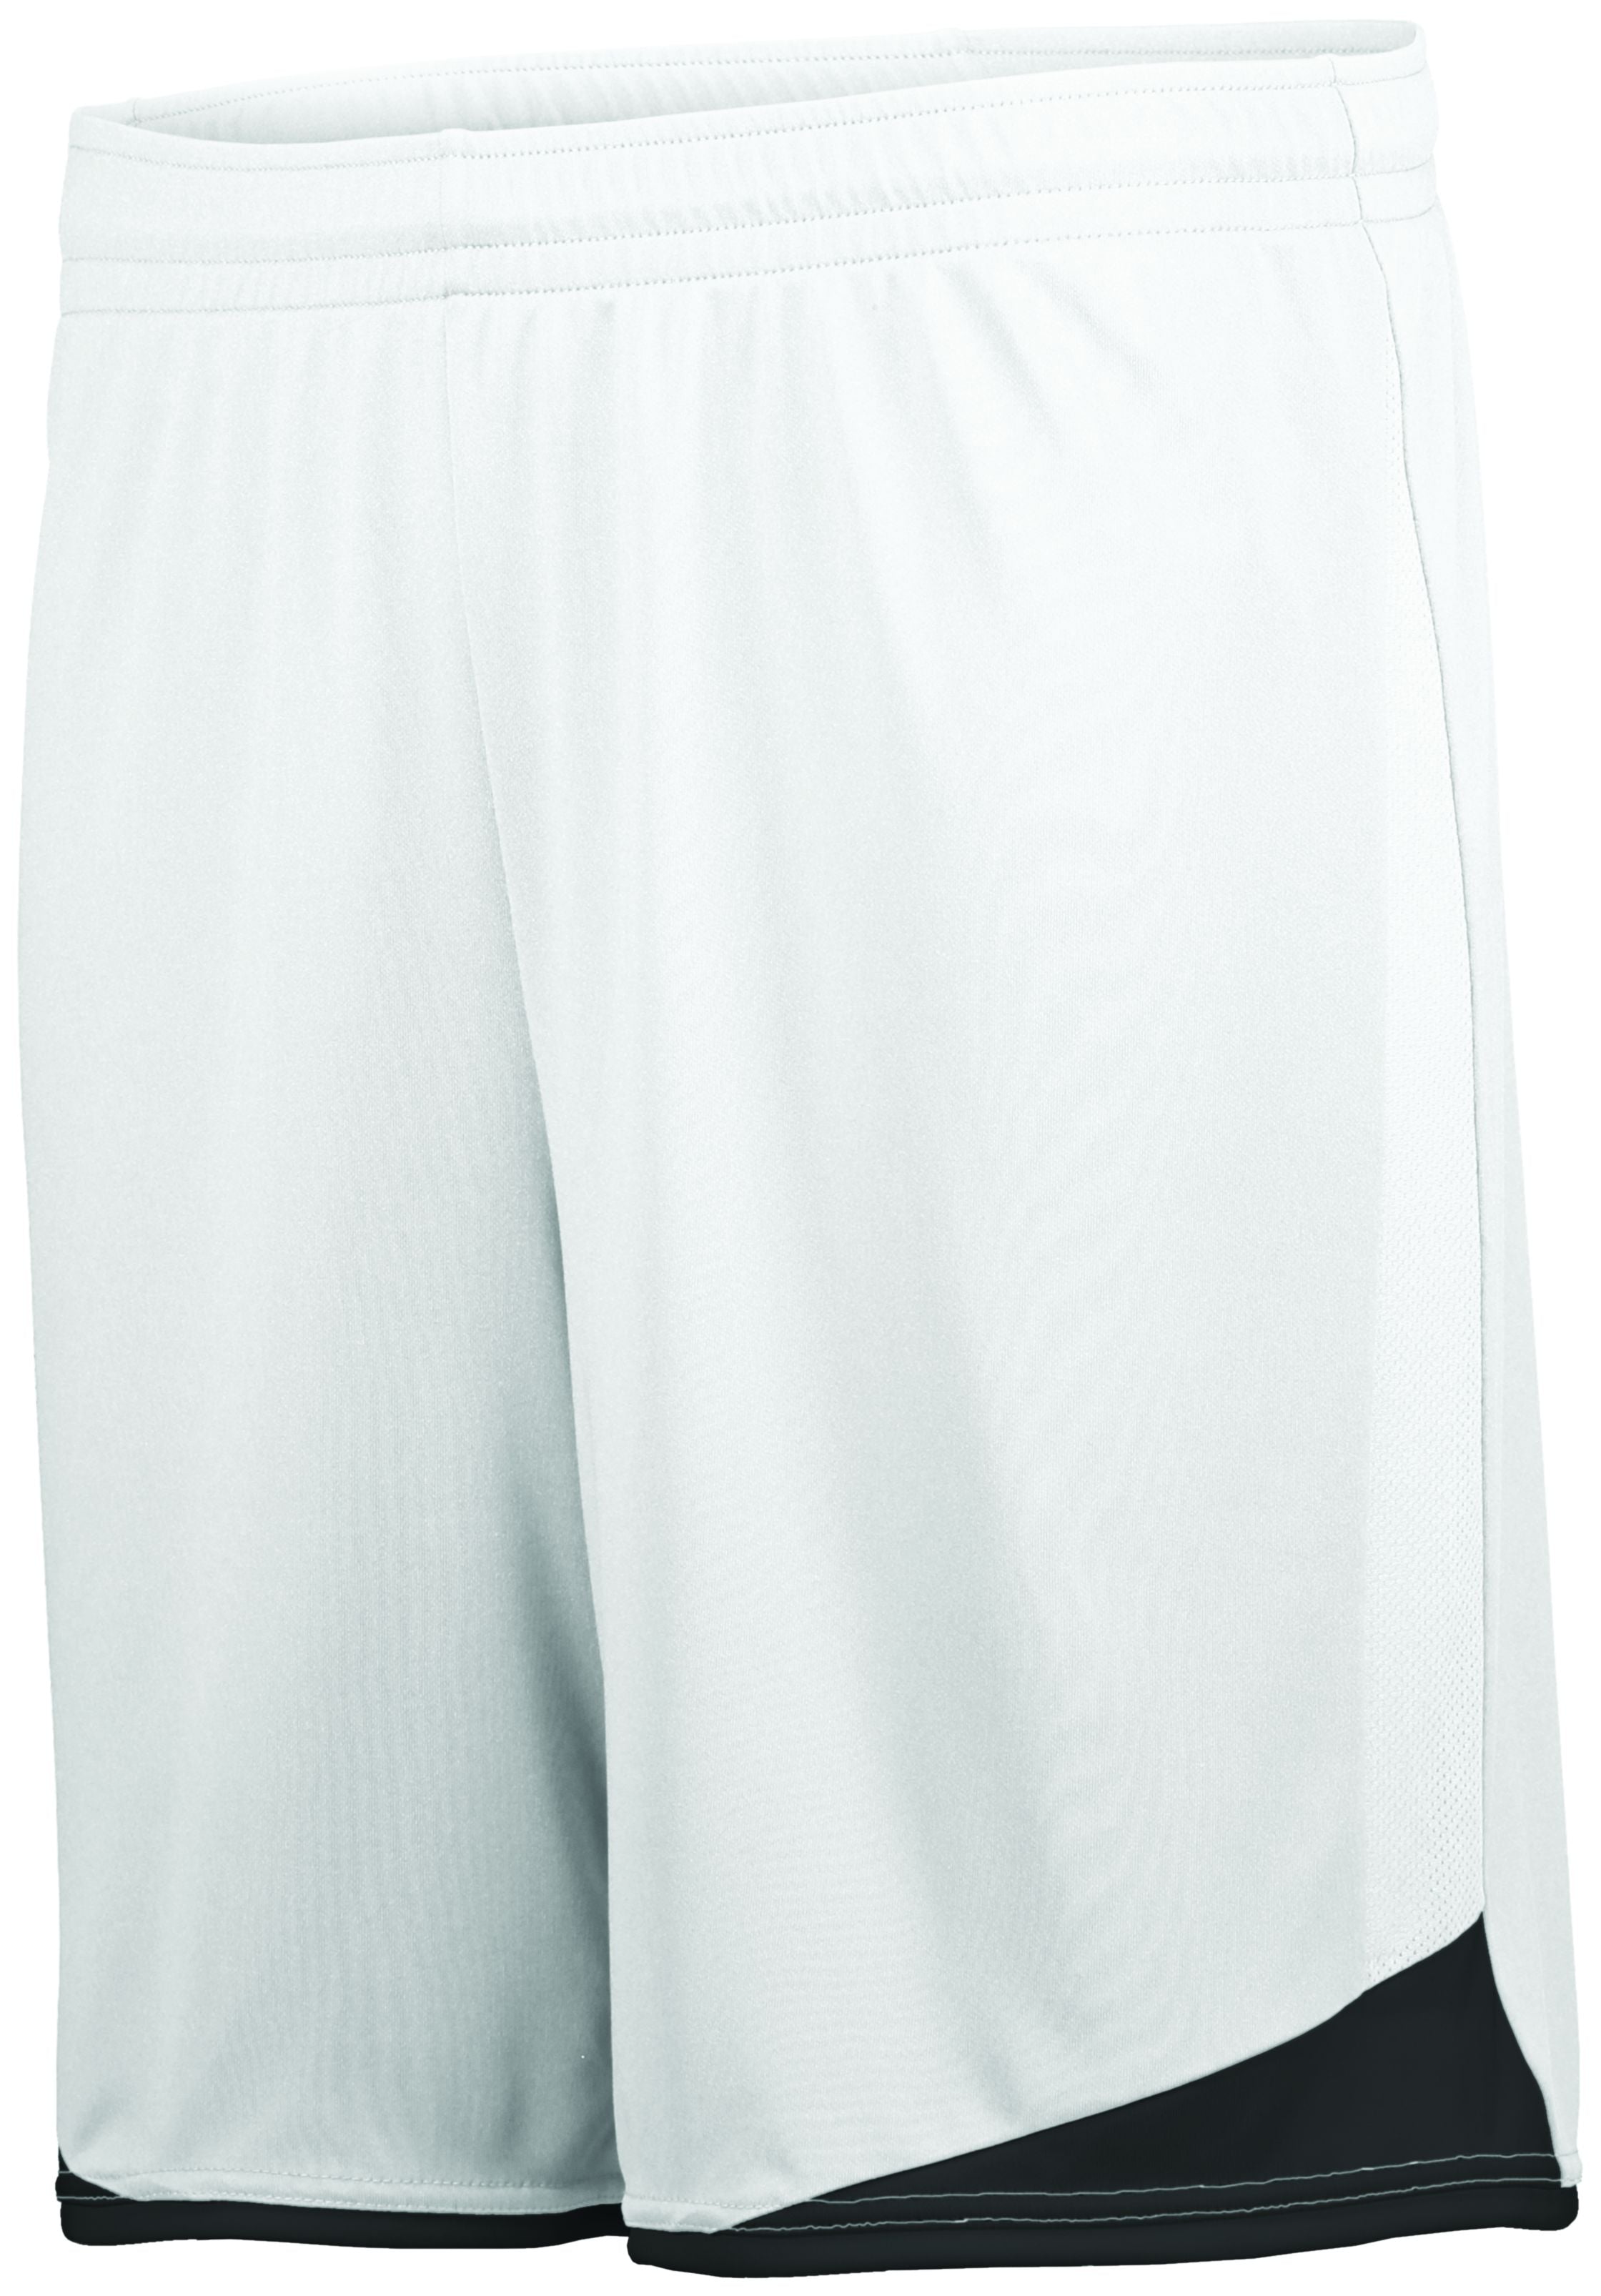 High 5 Stamford Soccer Shorts in White/Black  -Part of the Adult, Adult-Shorts, High5-Products, Soccer, All-Sports-1 product lines at KanaleyCreations.com